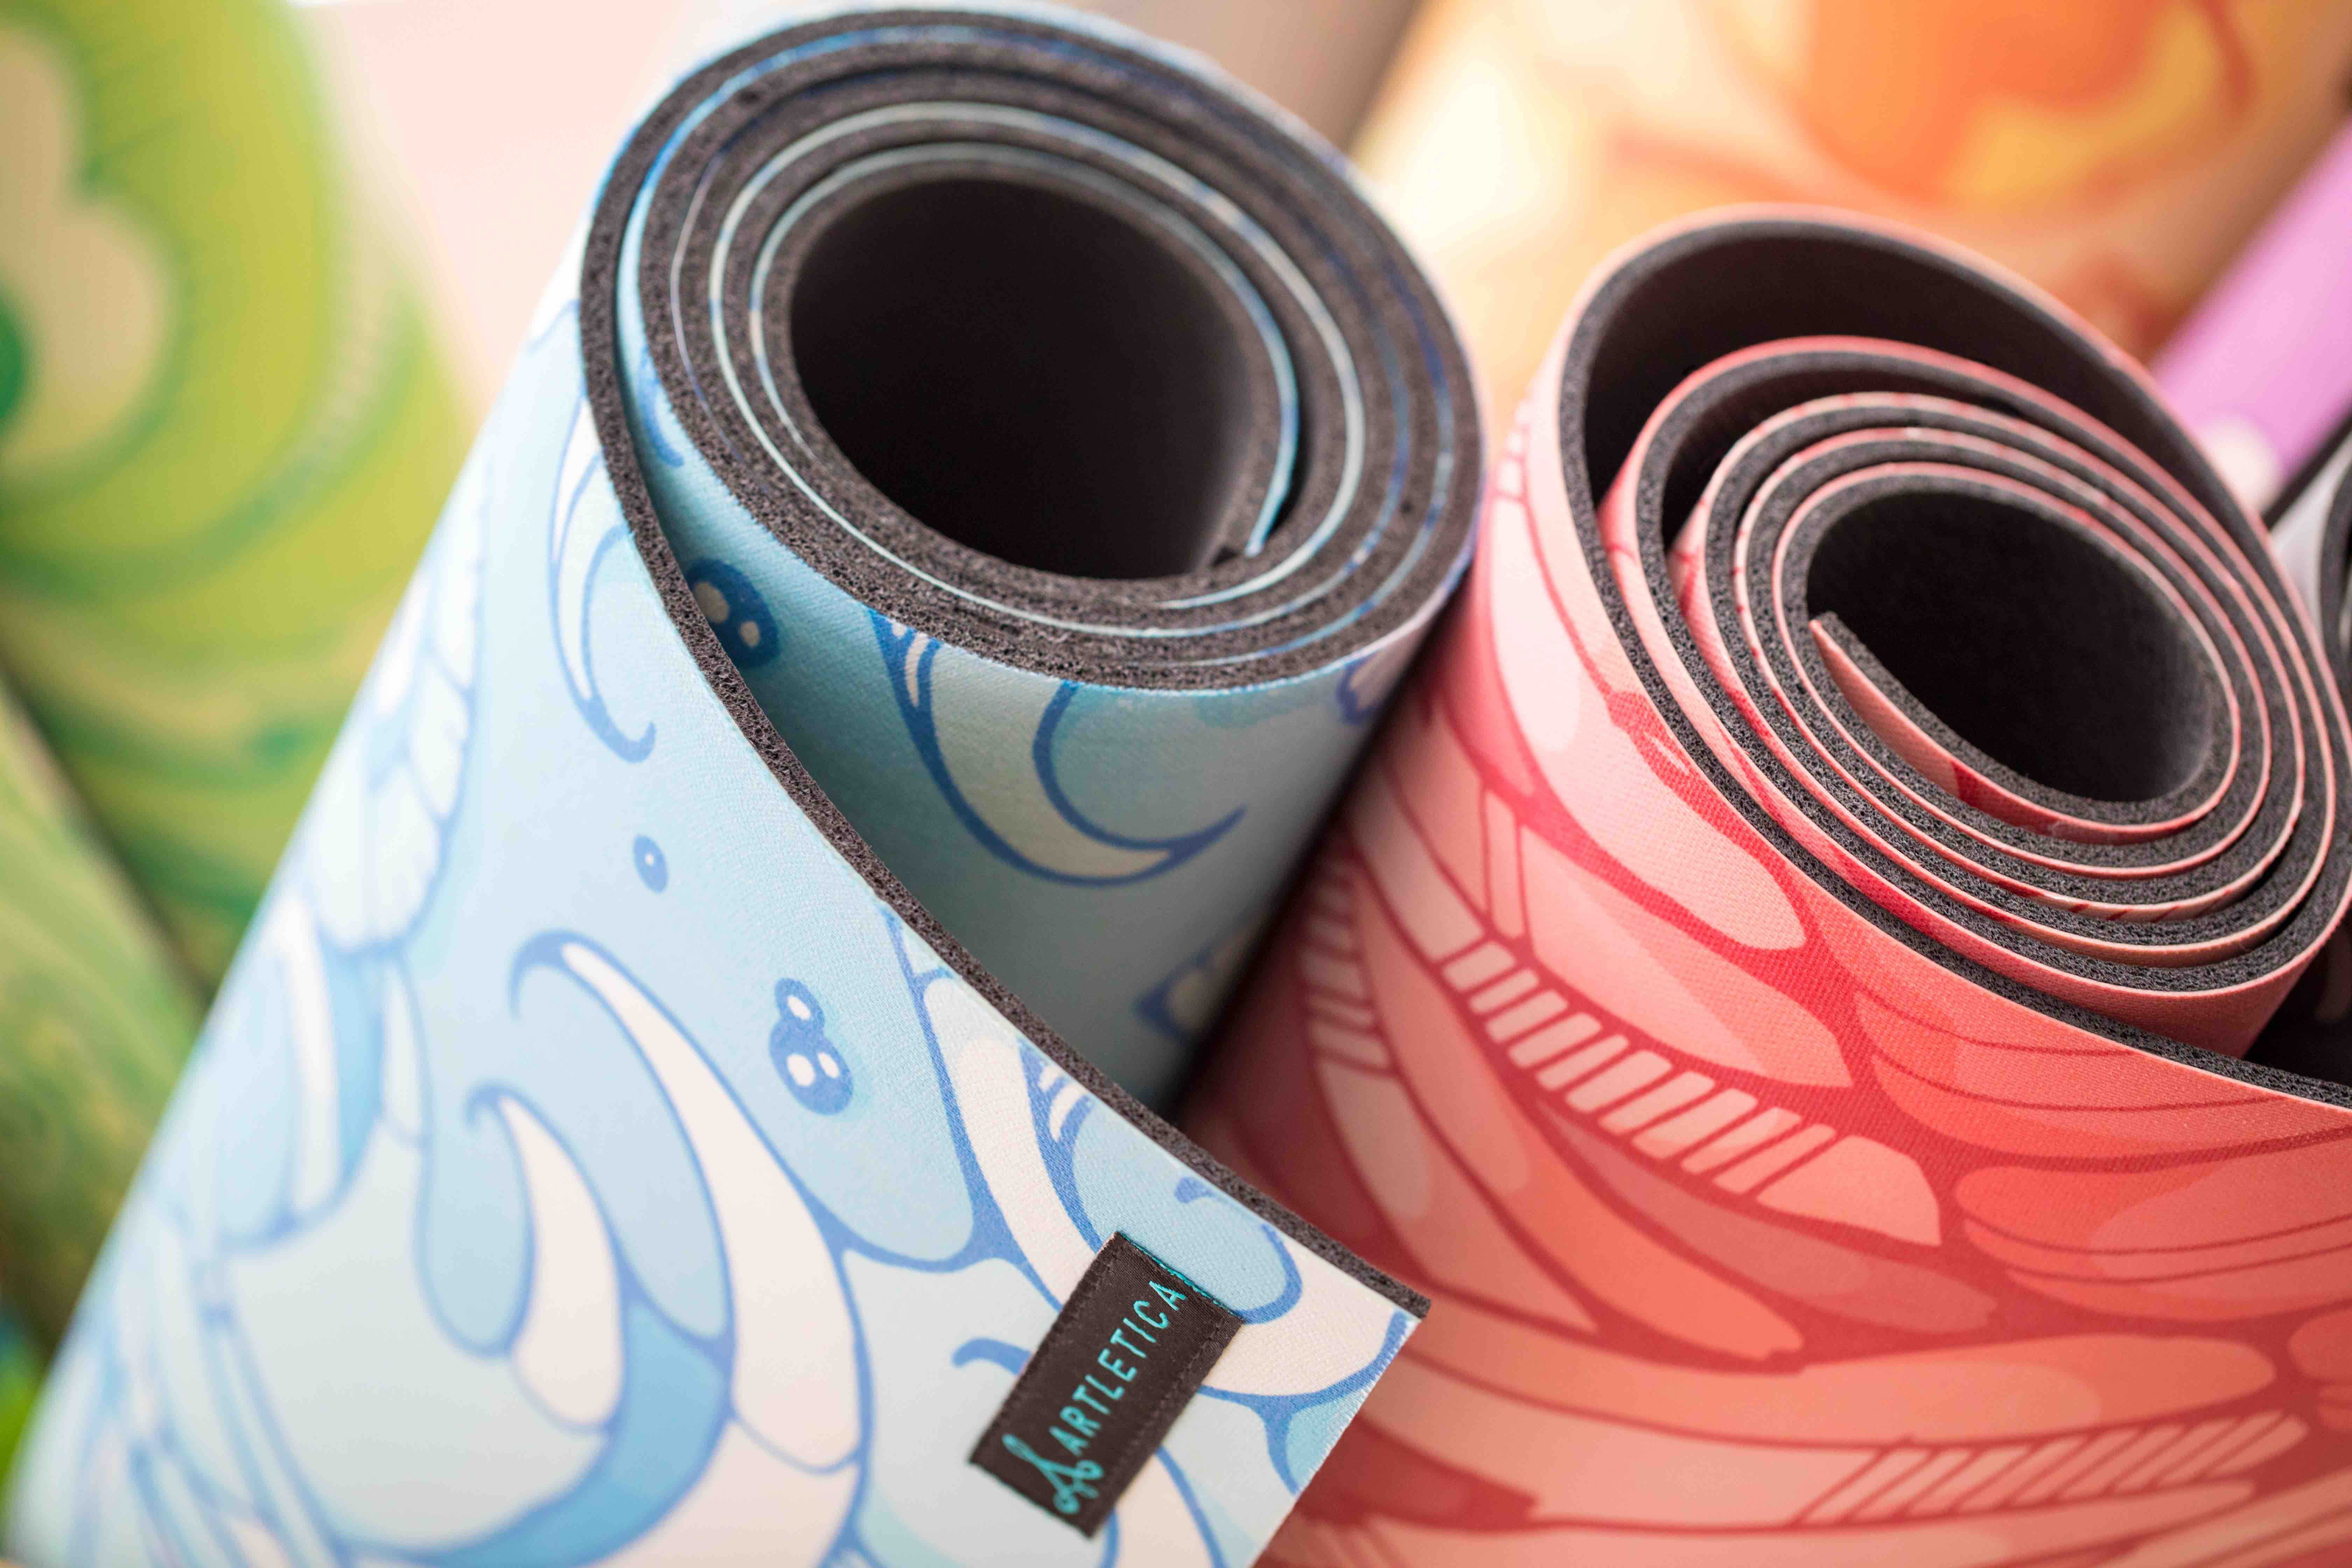 Artletica yoga mats rolled up for the next class.